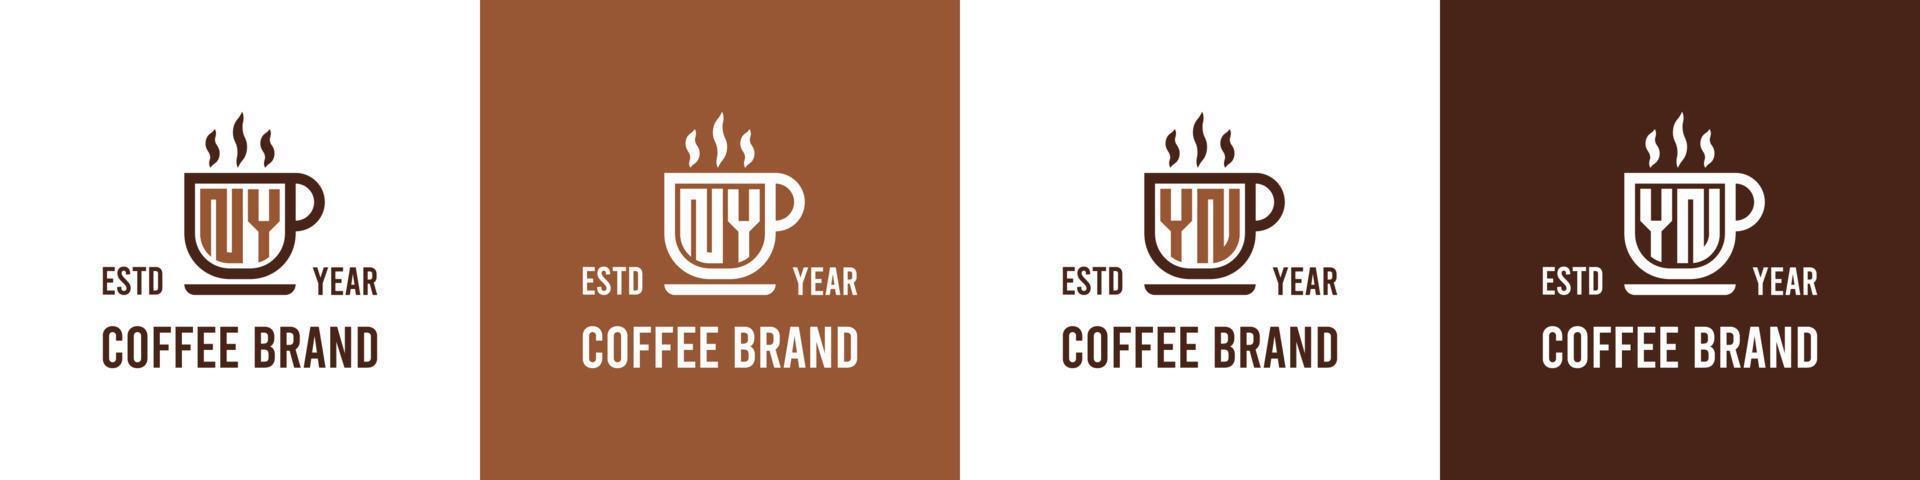 Letter NY and YN Coffee Logo, suitable for any business related to Coffee, Tea, or Other with NY or YN initials. vector